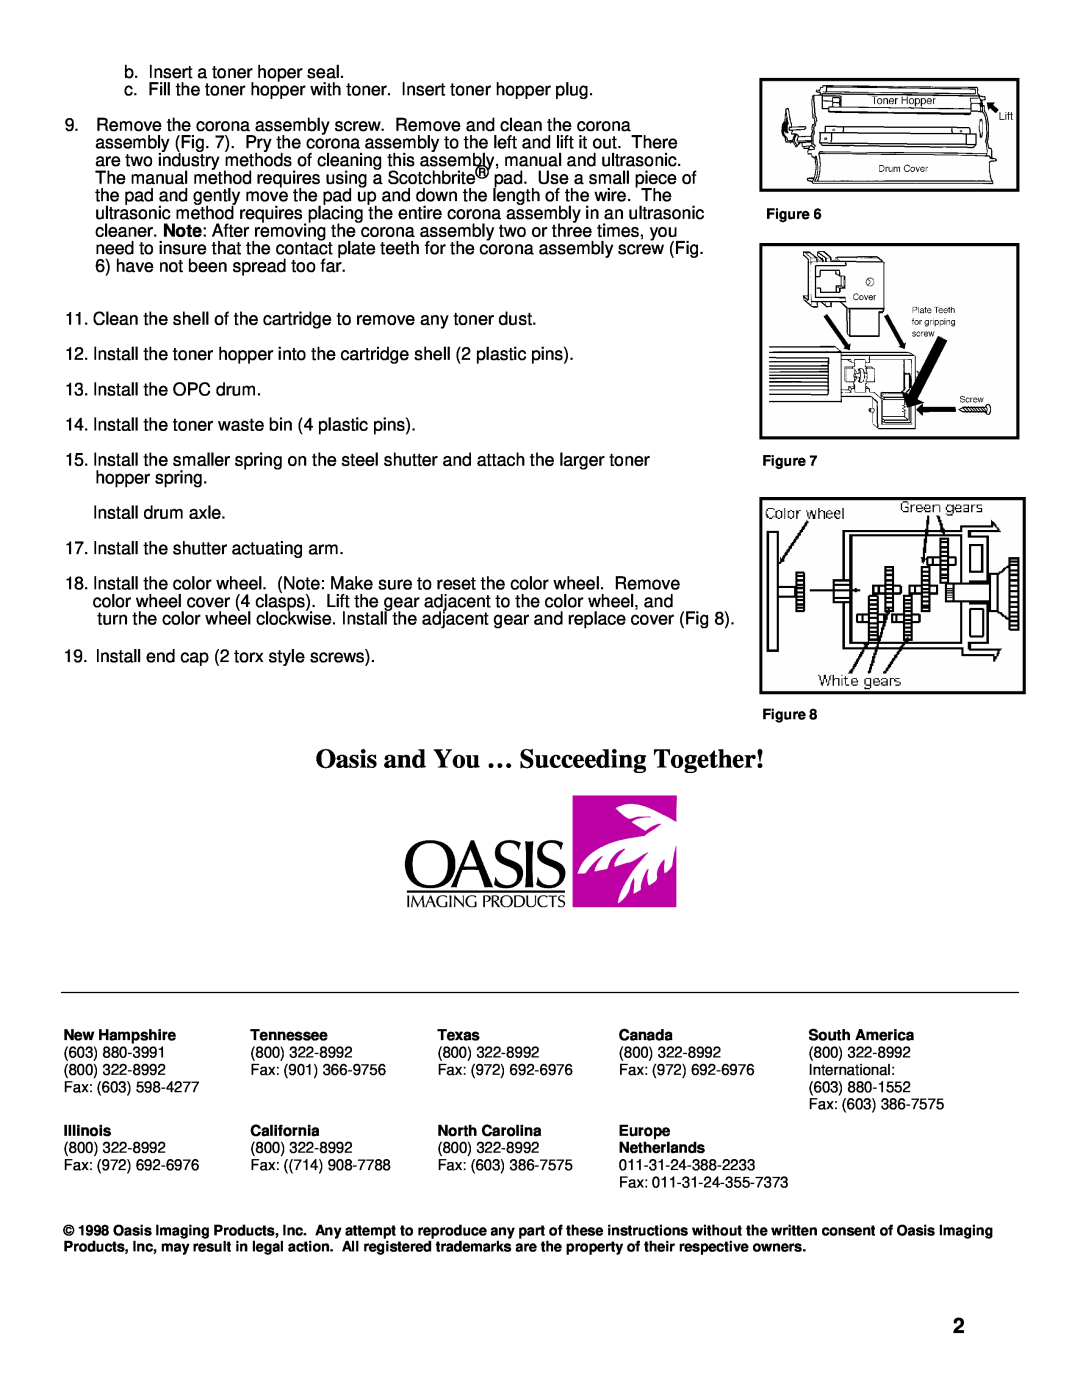 Canon A20 manual Oasis and You … Succeeding Together 